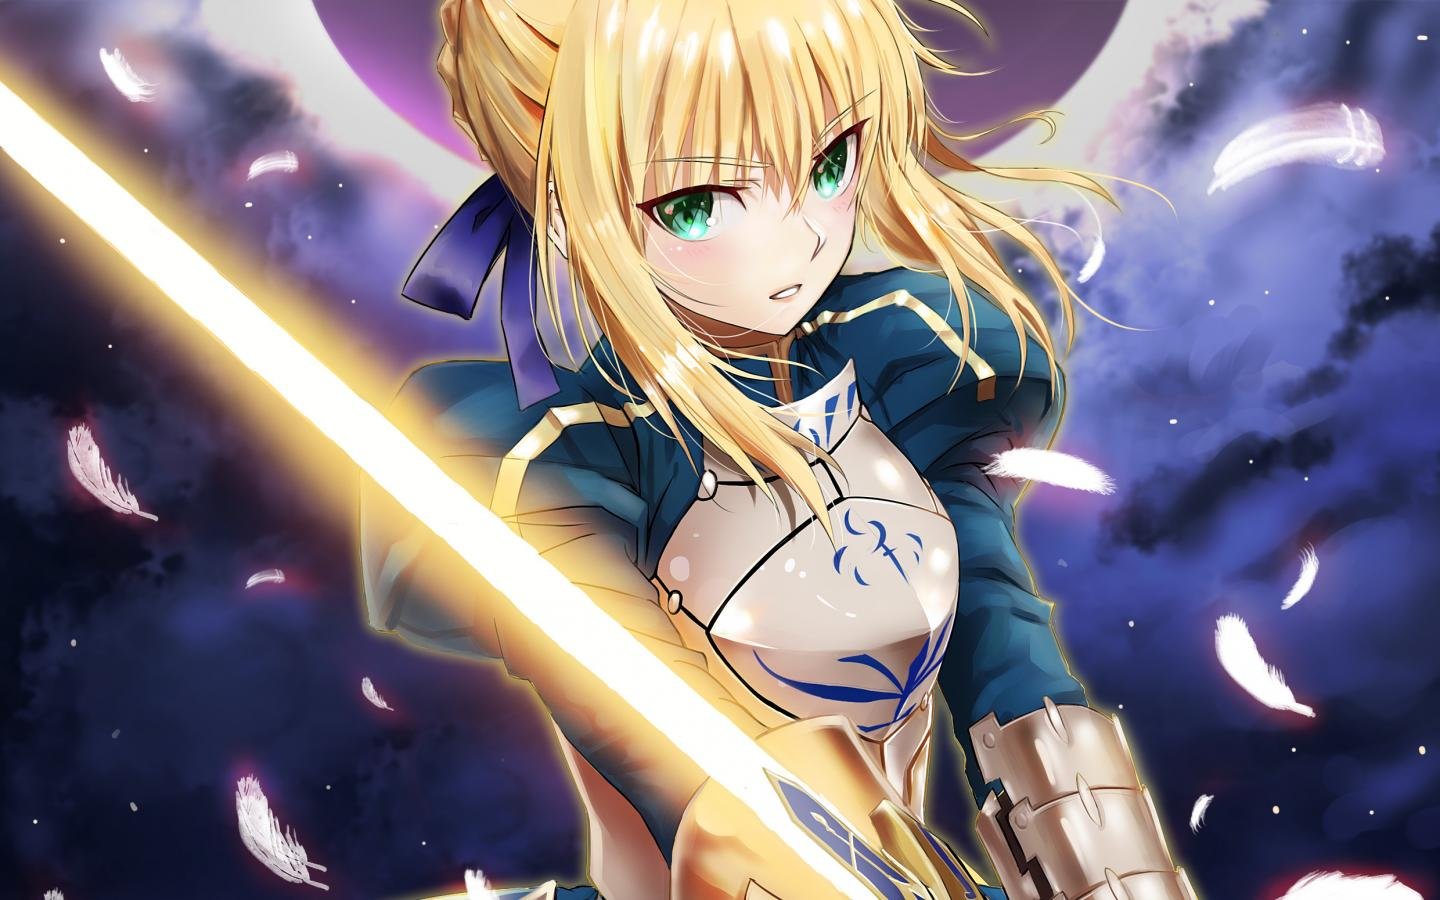 Saber (Fate Series) wallpaper ID:468694 for hd 1440x900 computer.